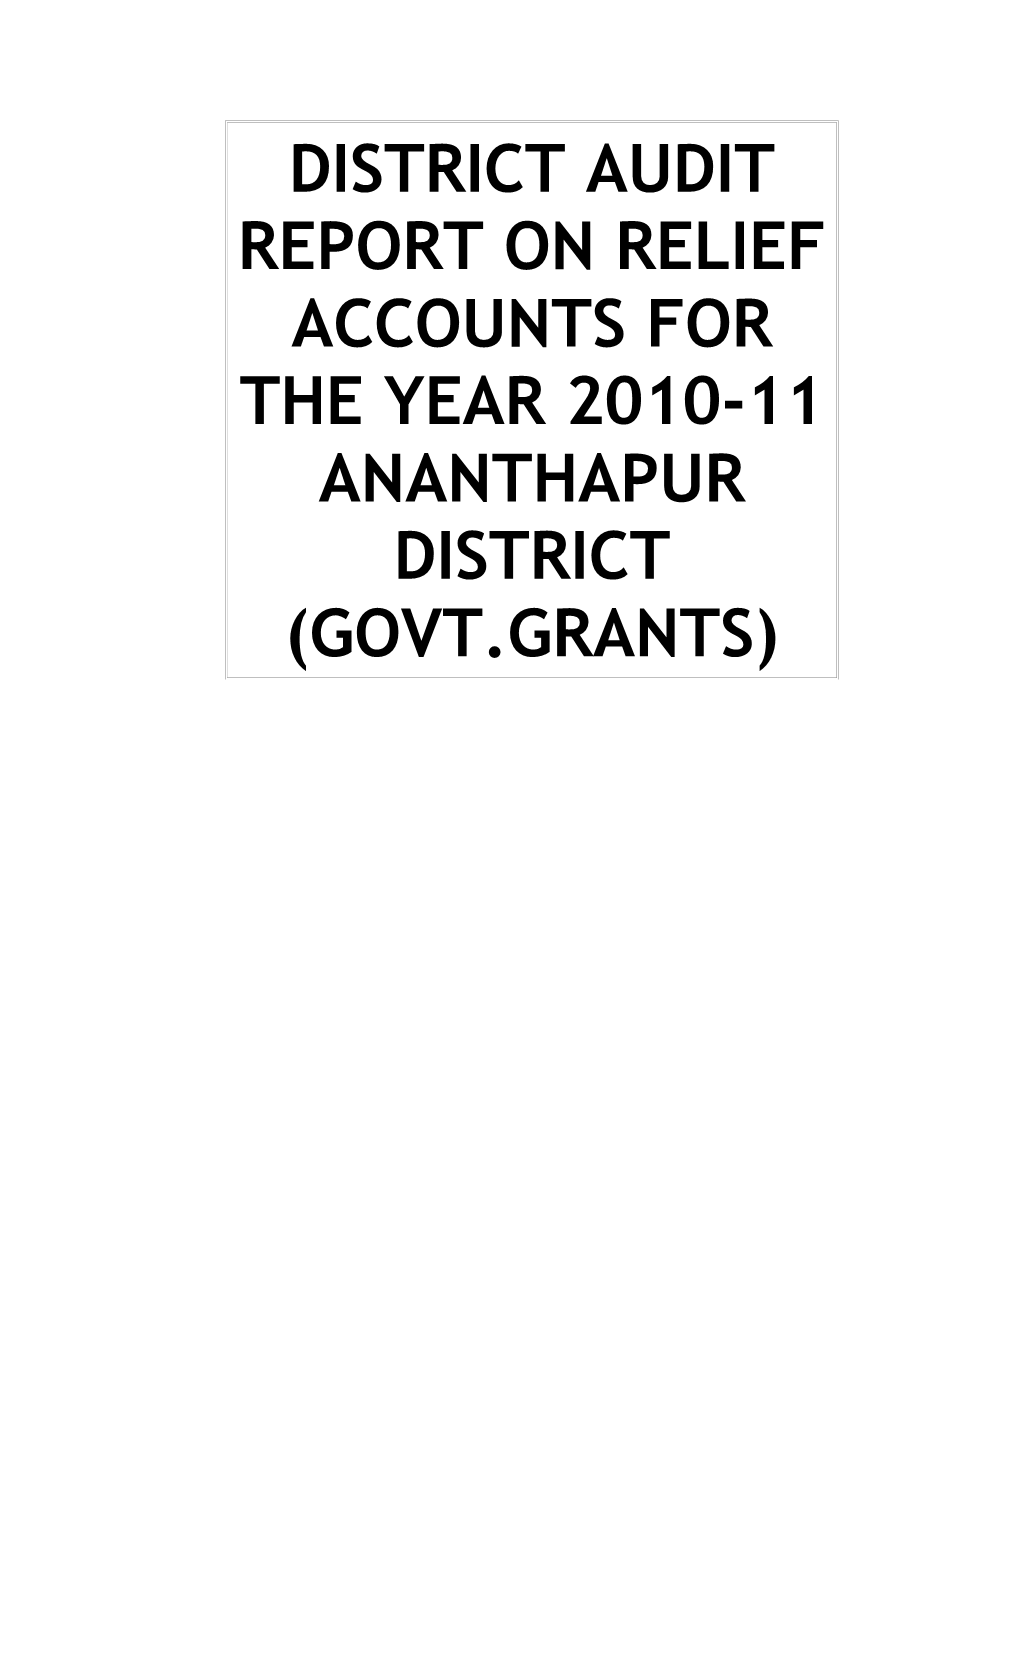 District Audit Report on Relief Accounts for the Year 2010-11 Ananthapur District (Govt.Grants)